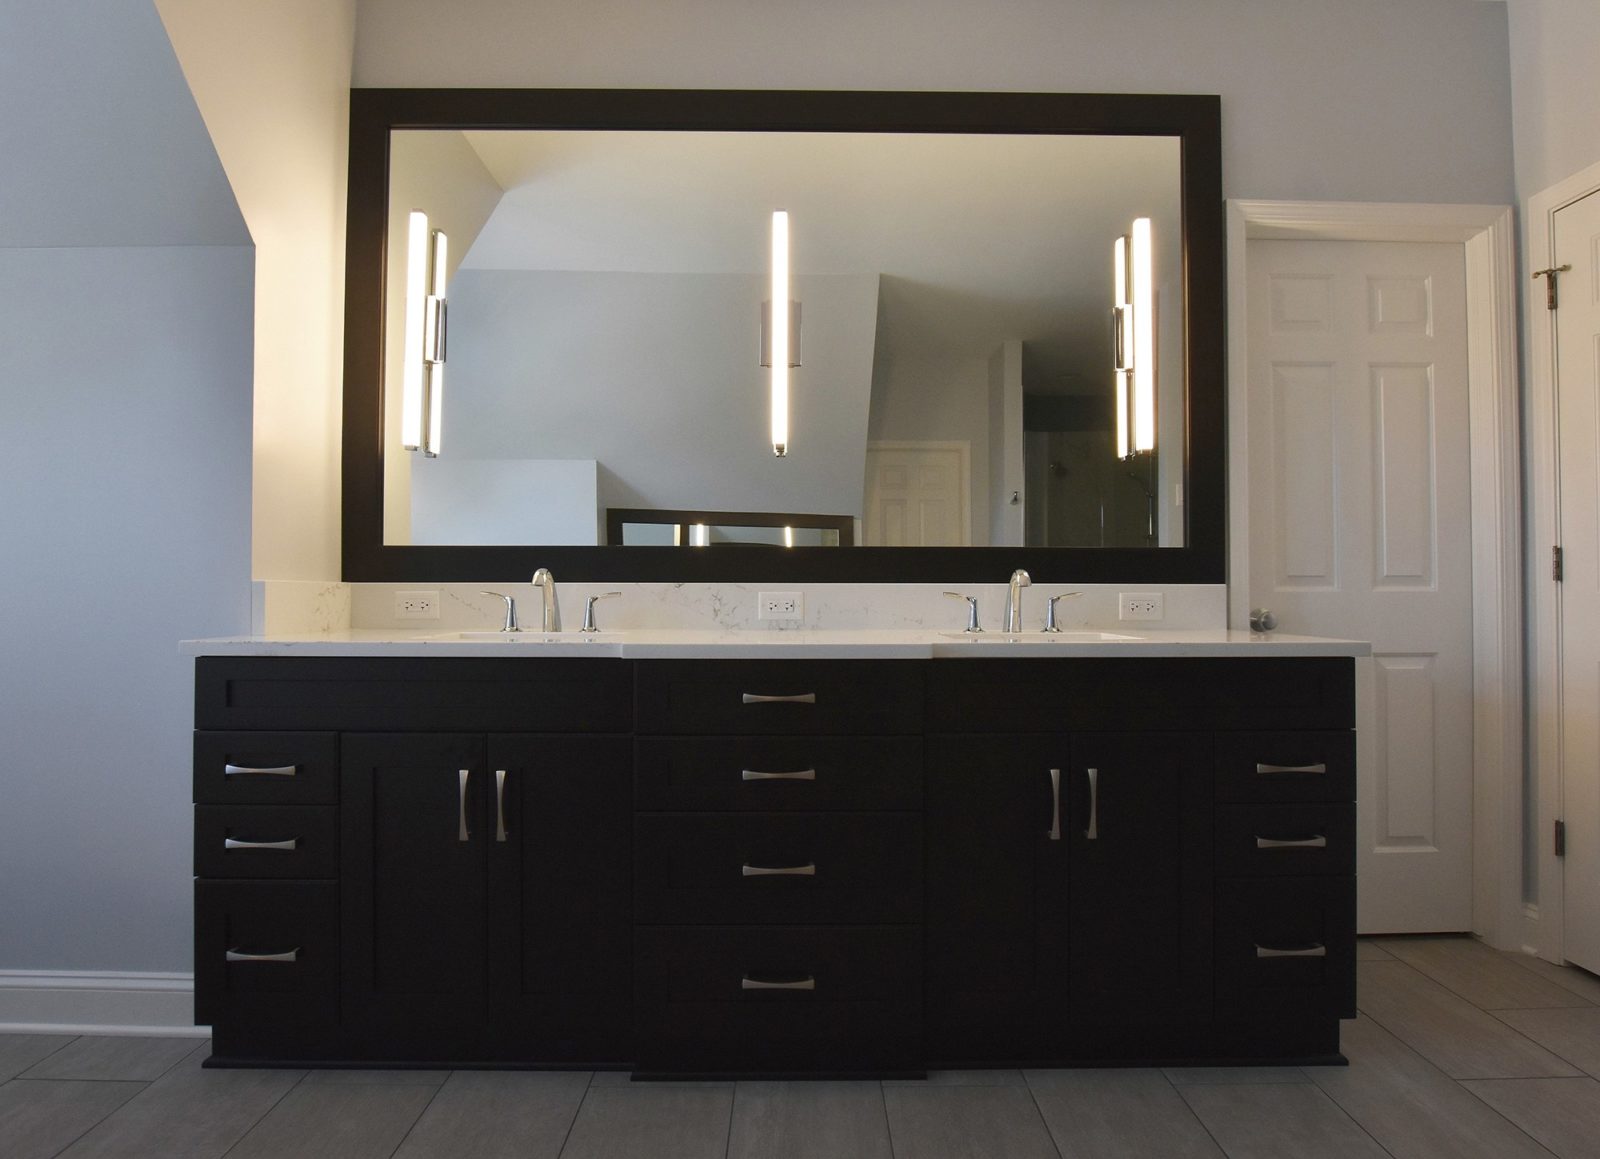 Connected backroom sinks with large mirror above, cabinets and drawers below